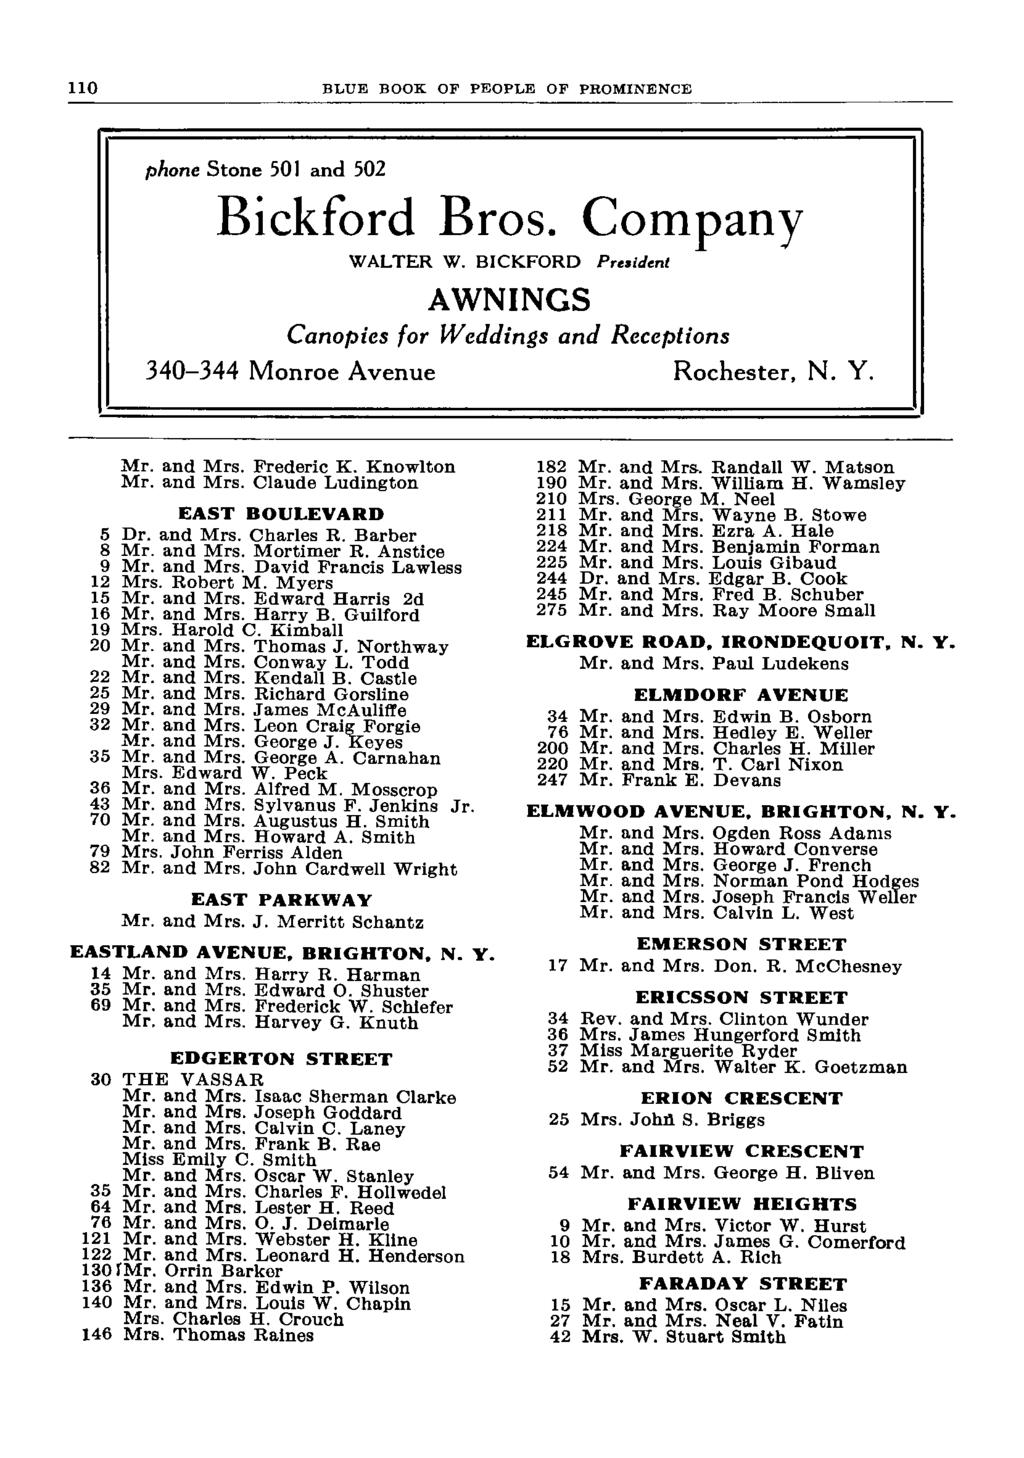 BLUE BOOK OF PEOPLE OF PROMINENCE phone Stone 501 and 502 Bickford Bros. Company WALTER W. BICKFORD President AWNINGS Canopies for Weddings and Receptions 340-344 Monroe Avenue Rochester, N. Y. Mr.